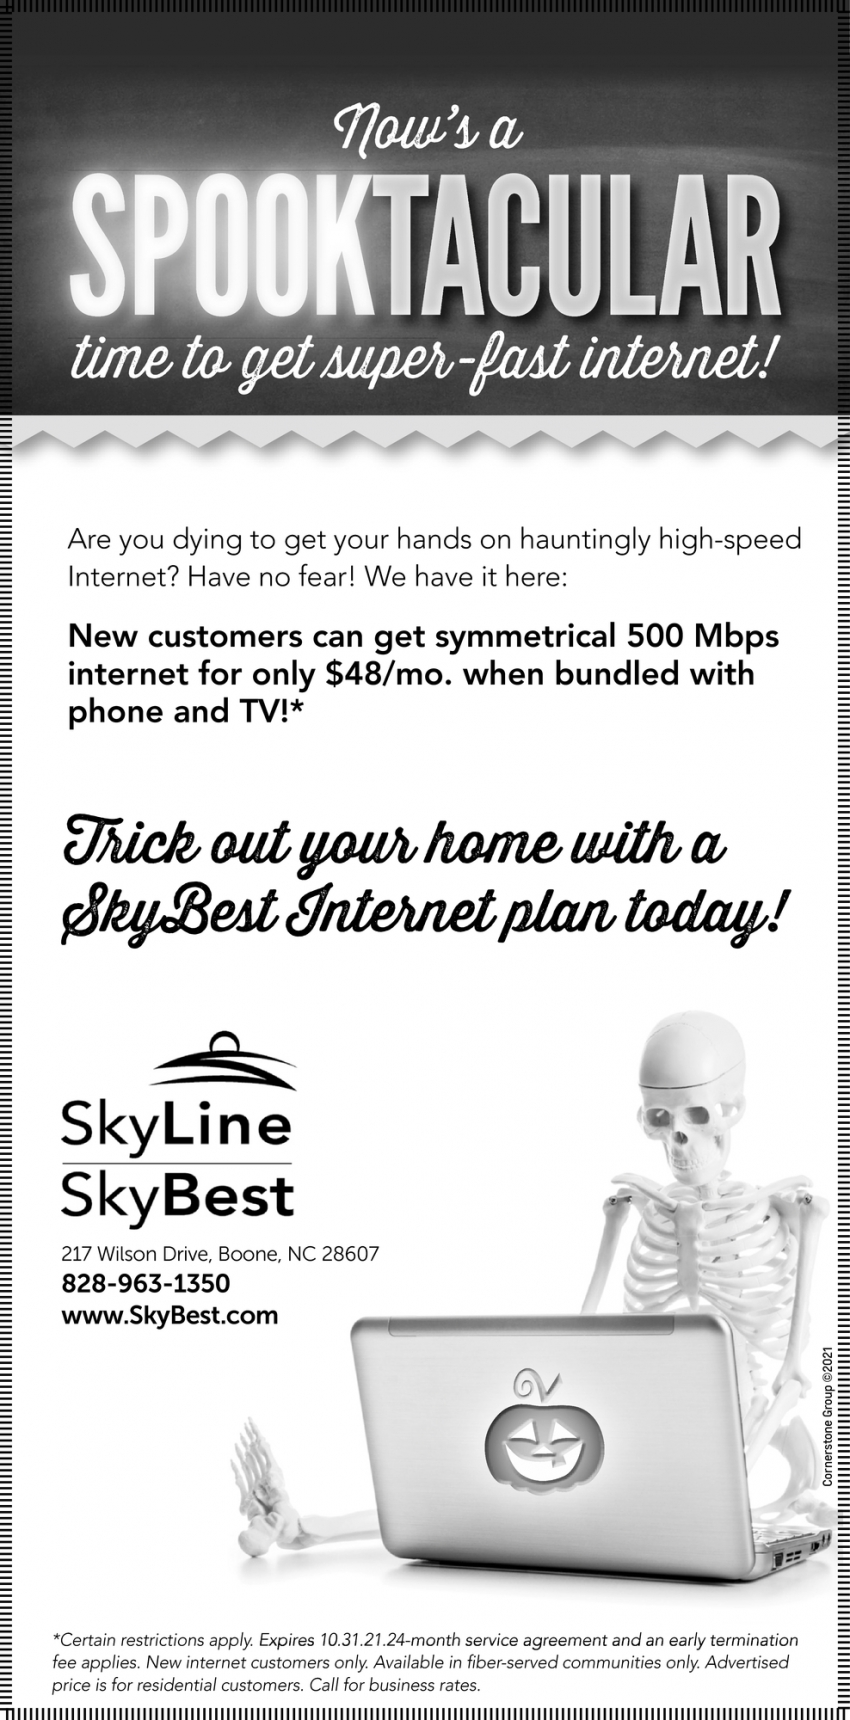 Now's a Spooktacular Time To Get Super-Fast Internet & Crystal-Clear Tv!